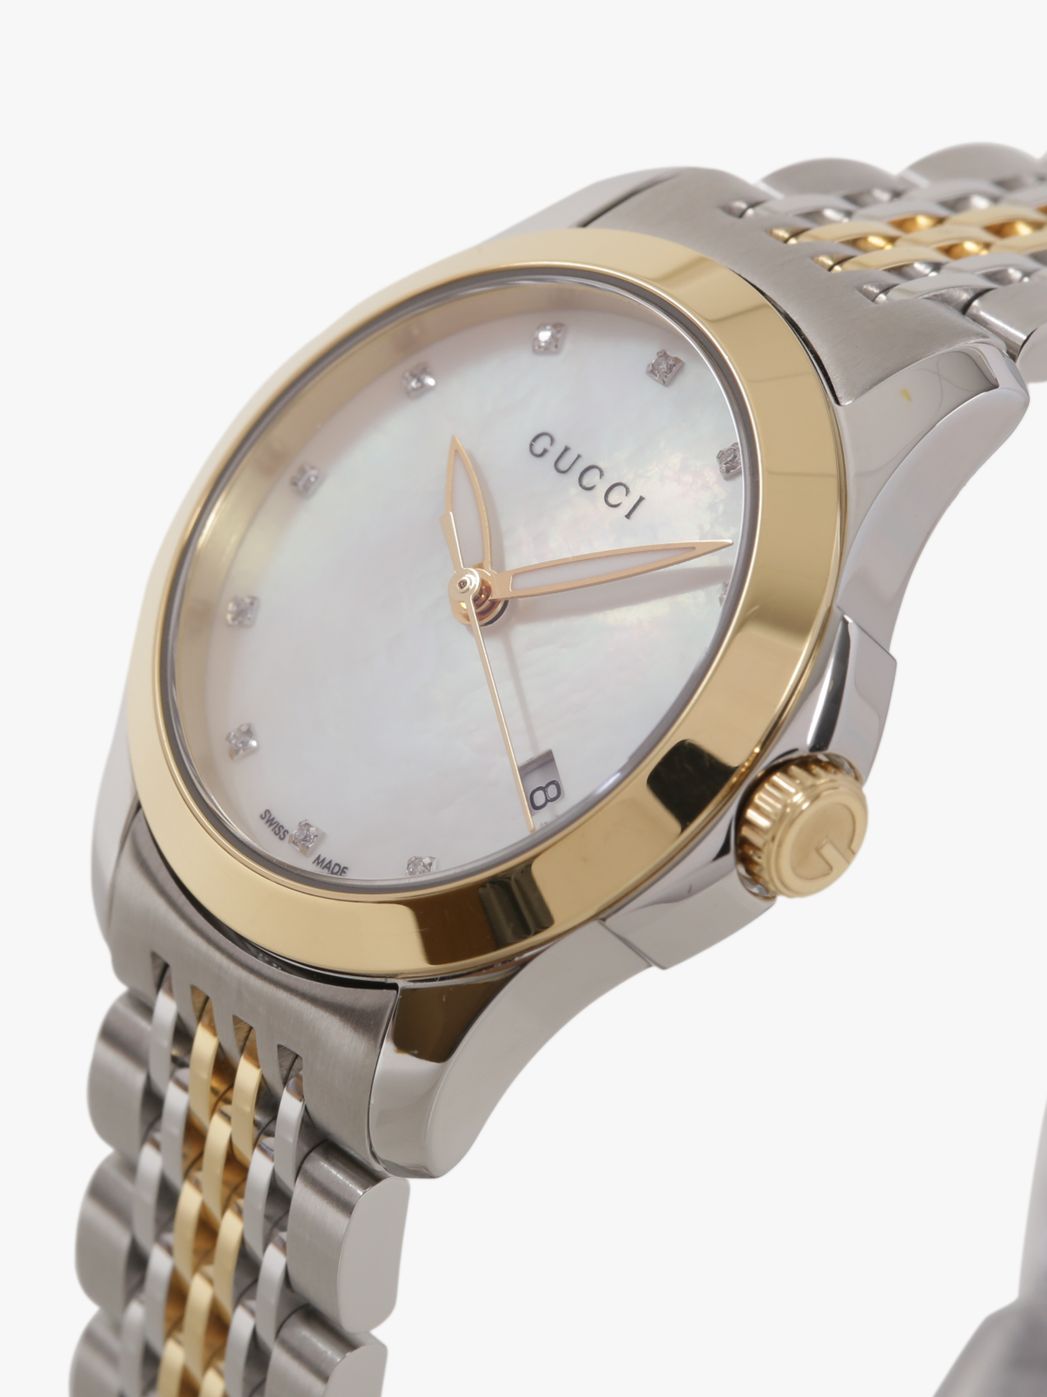 gucci gold and silver watch